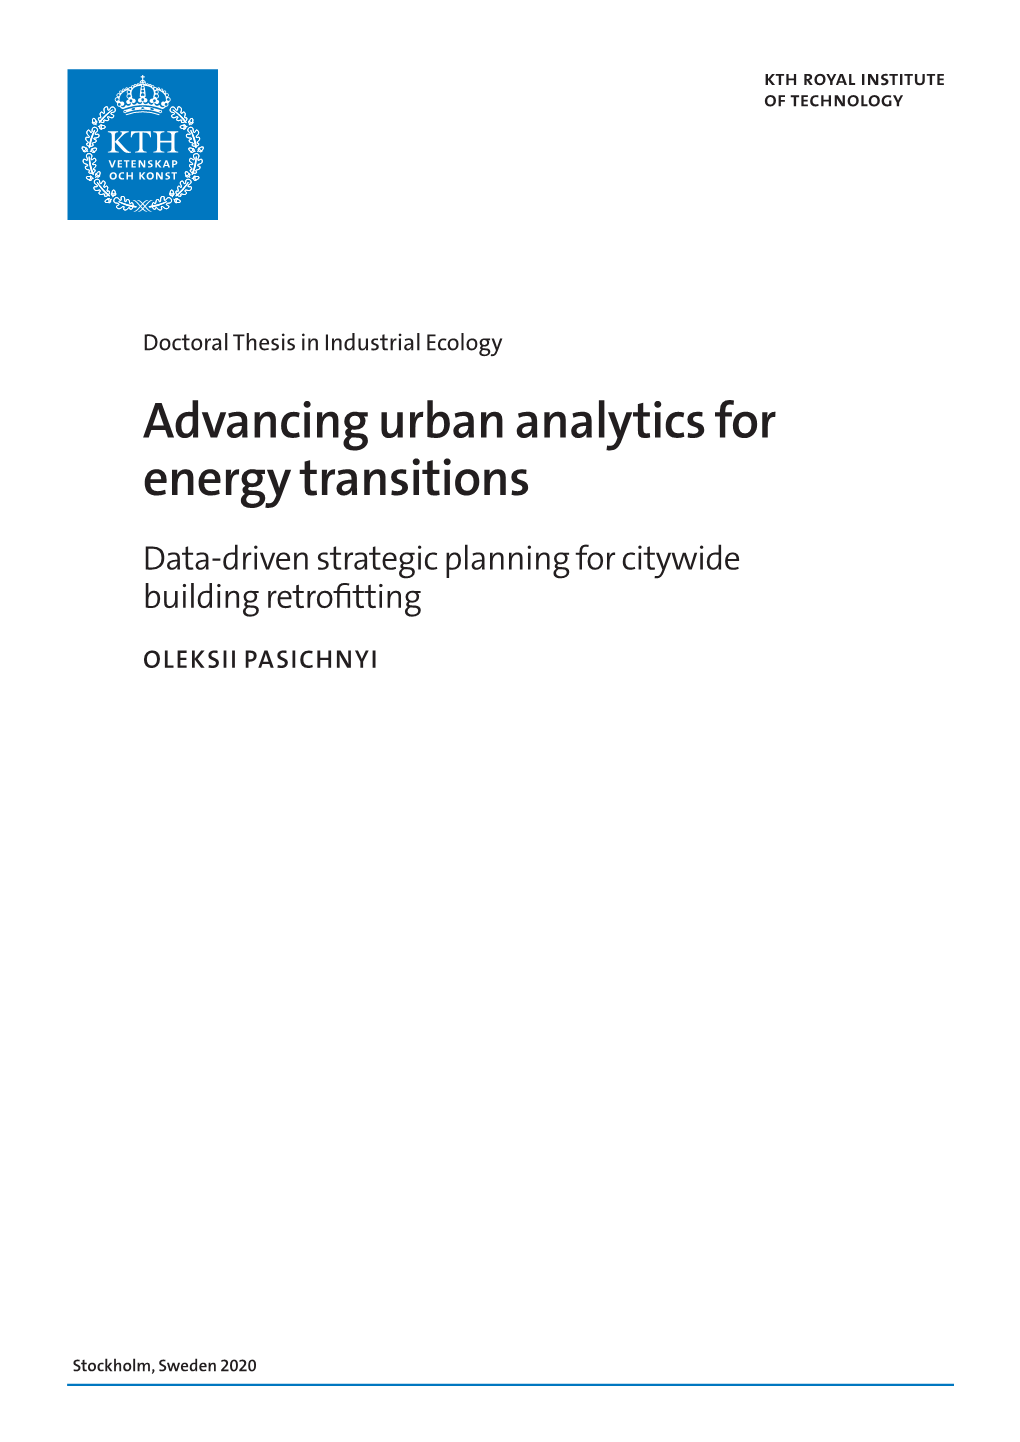 Advancing Urban Analytics for Energy Transitions